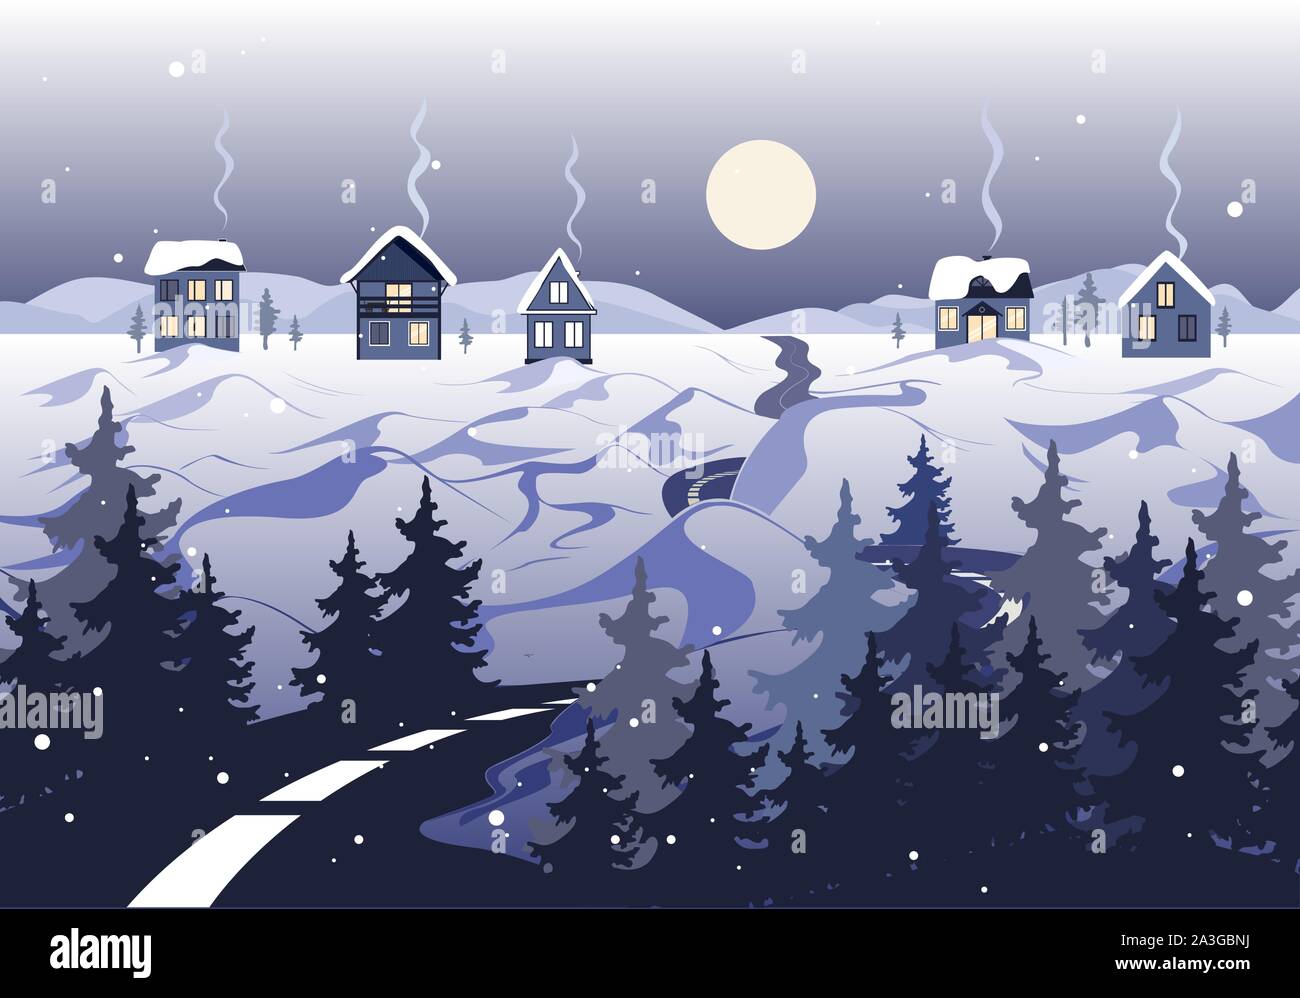 Winter landscape with road, houses and trees. Village with full moon. Happy new year and Merry Christmas card. Vector illustration Stock Vector